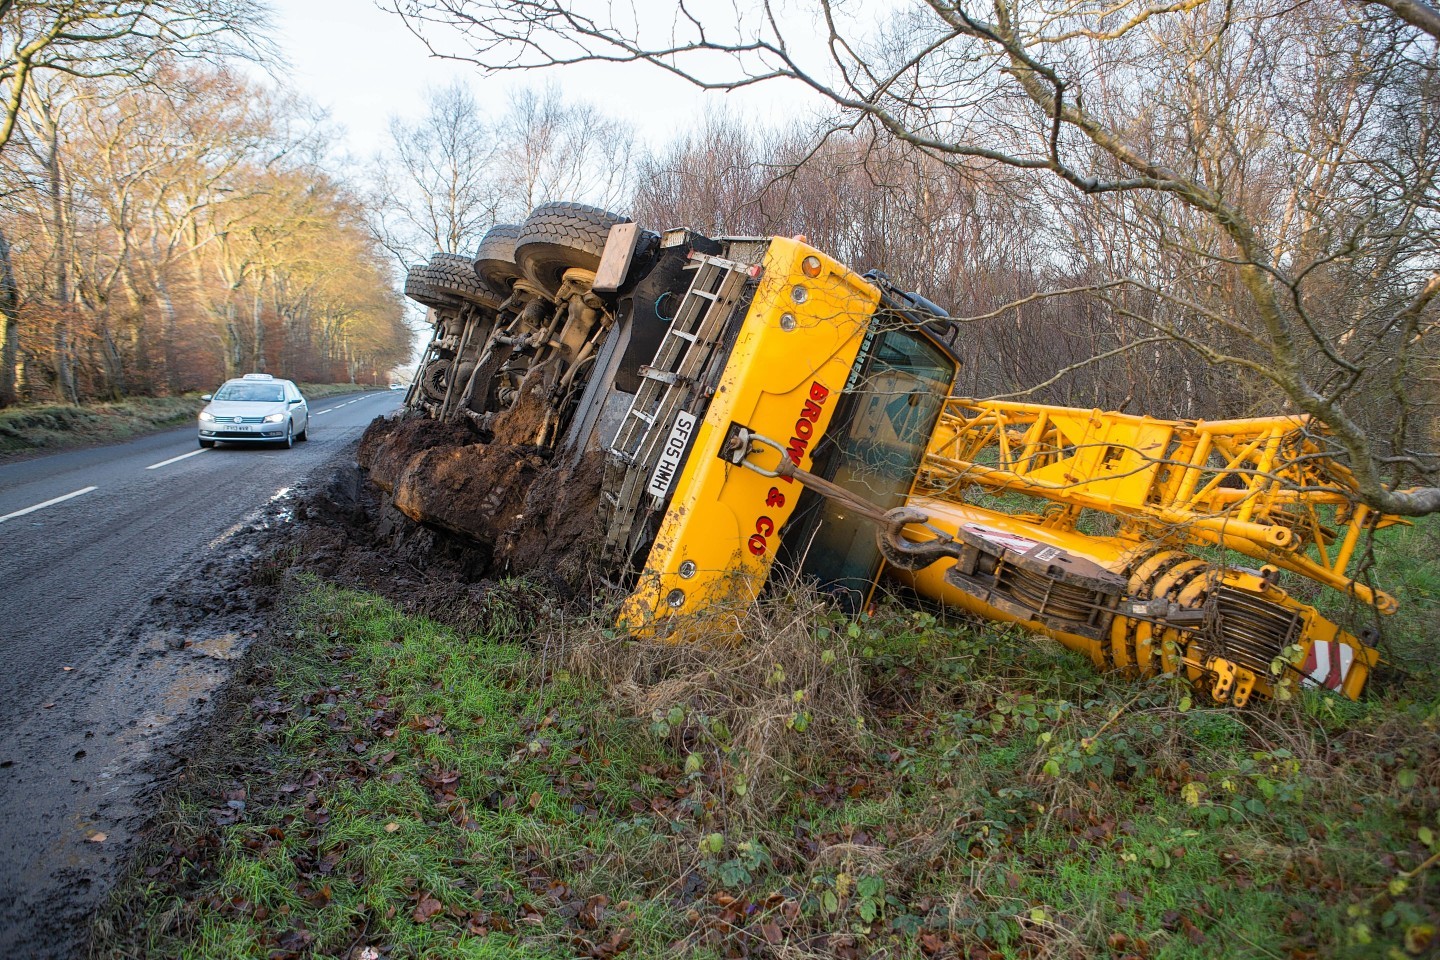 Fortunately nobody was injured when the crane toppled off the road